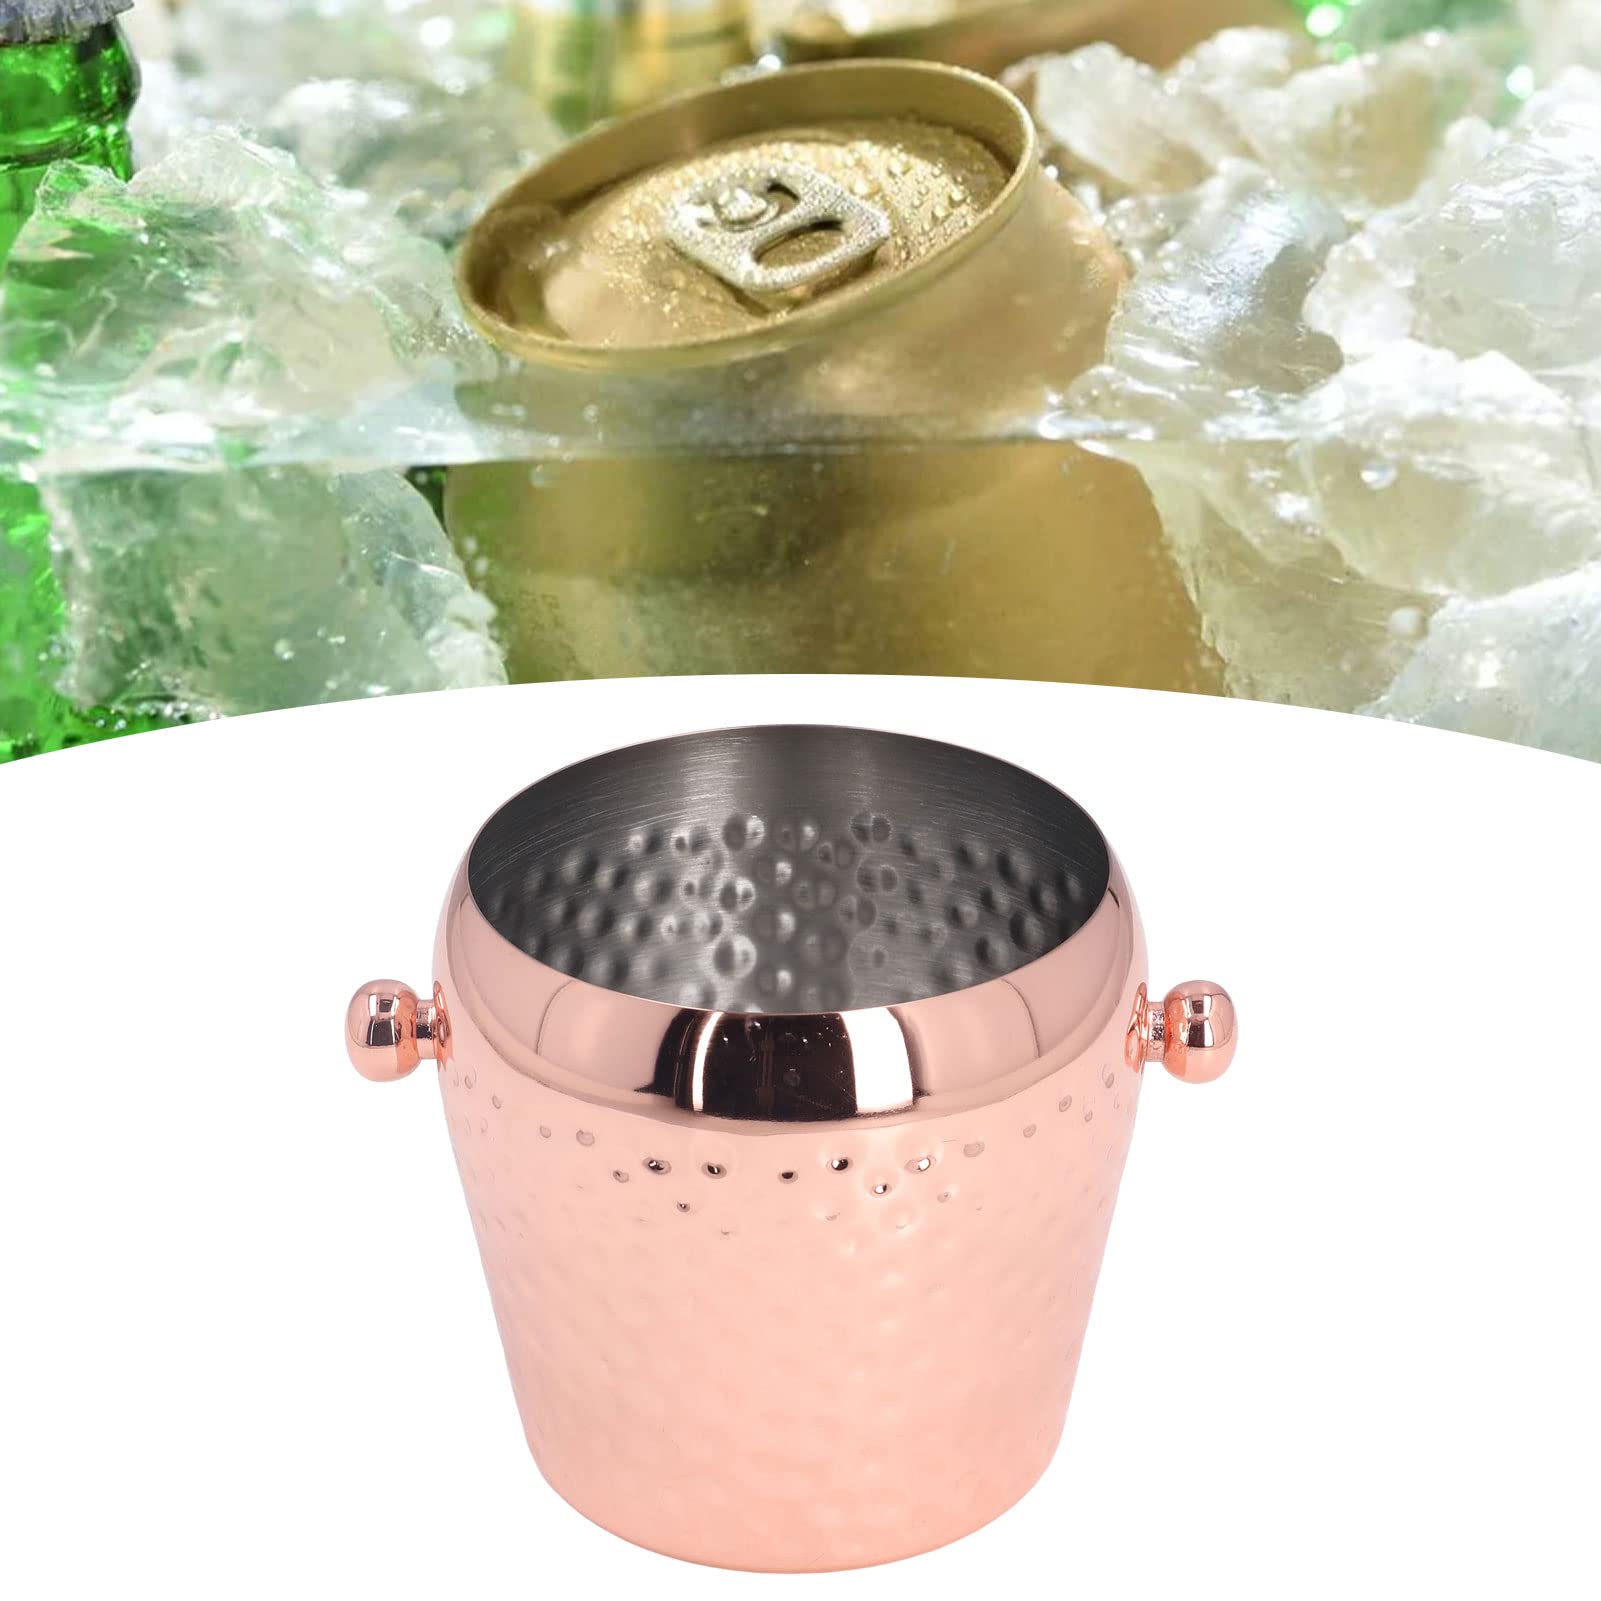 BuyWeek Ice Bucket, 1000ml Champagne Bucket 10.9 x 8.8 x 11.5cm Stainless Steel Wine Bucket Portable Beer Chiller Bucket for Bar Party Club(Rose Gold)